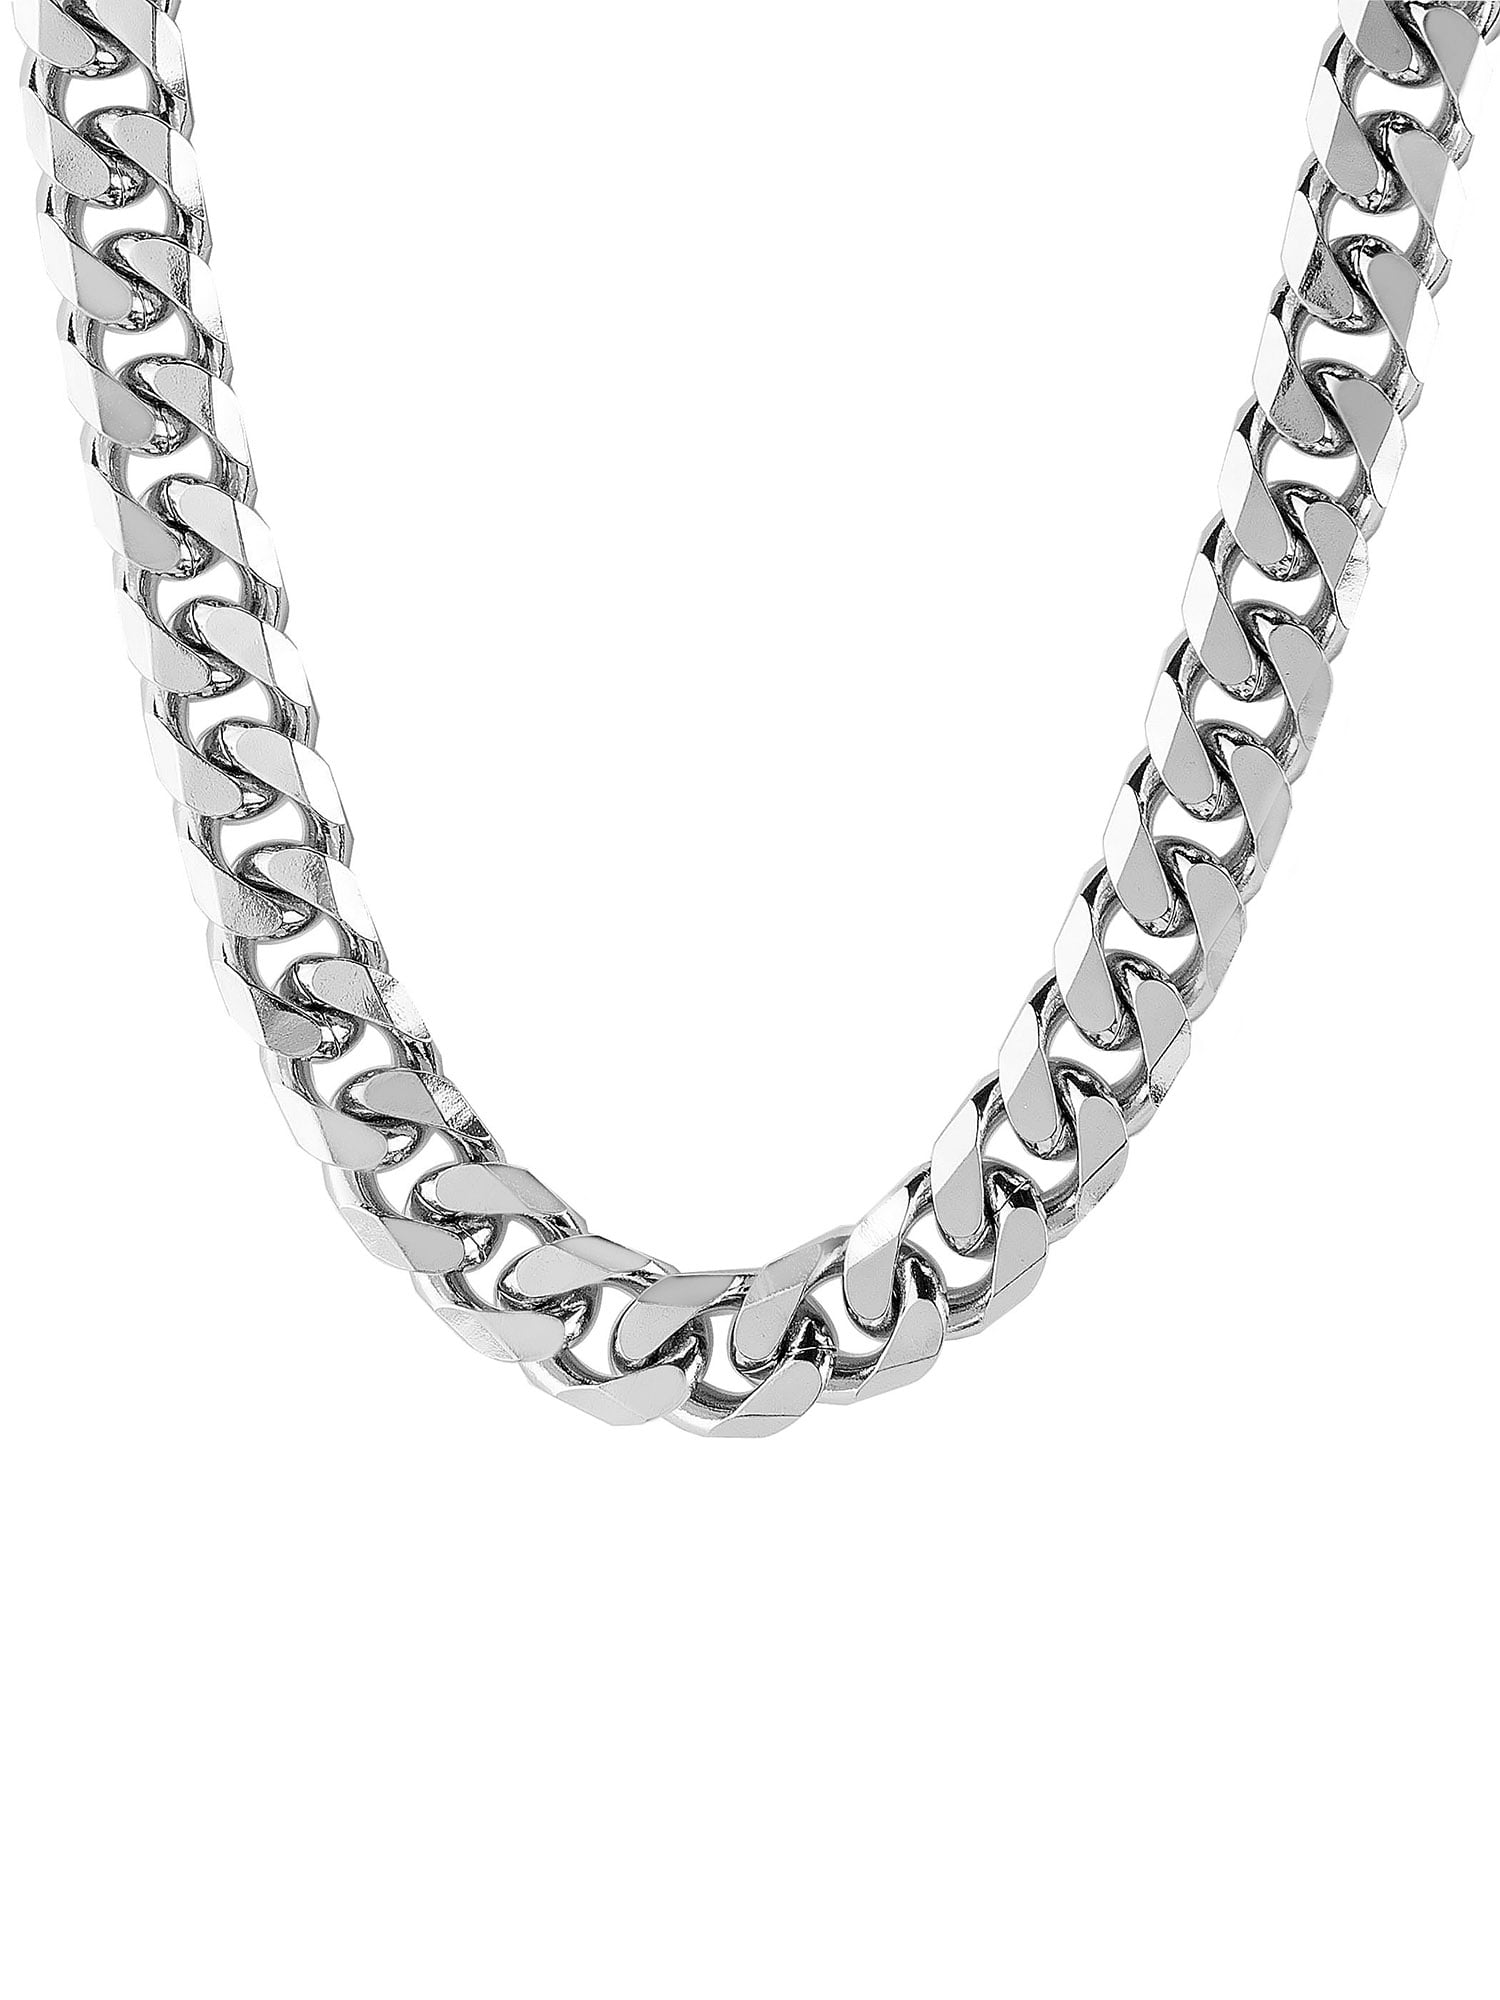 24MEN Stainless Steel 5mm Silver Cuban Curb Link Chain Skull Head  Pendant*P84